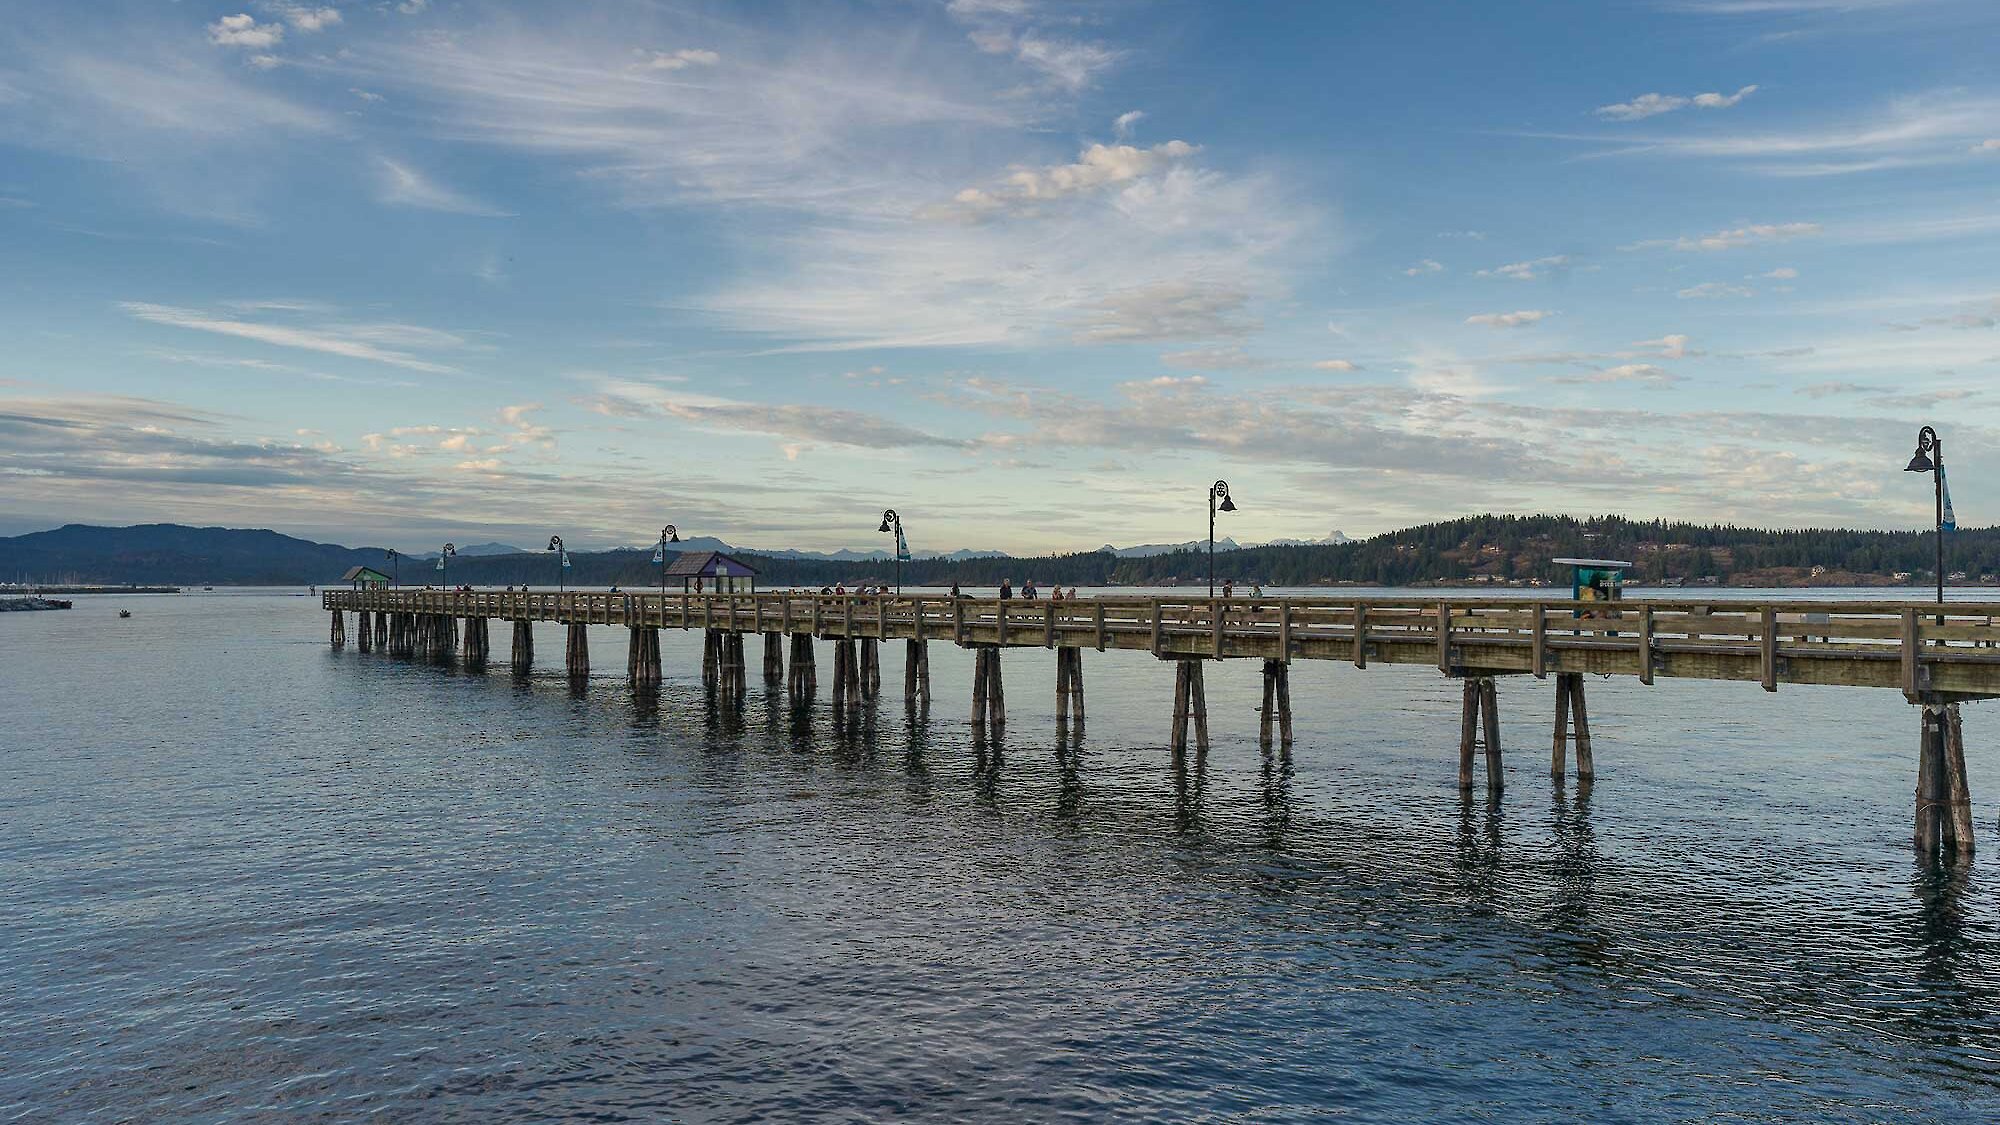 The Campbell River Pier stretches out along the blue sky and water with Quadra Island in the background.